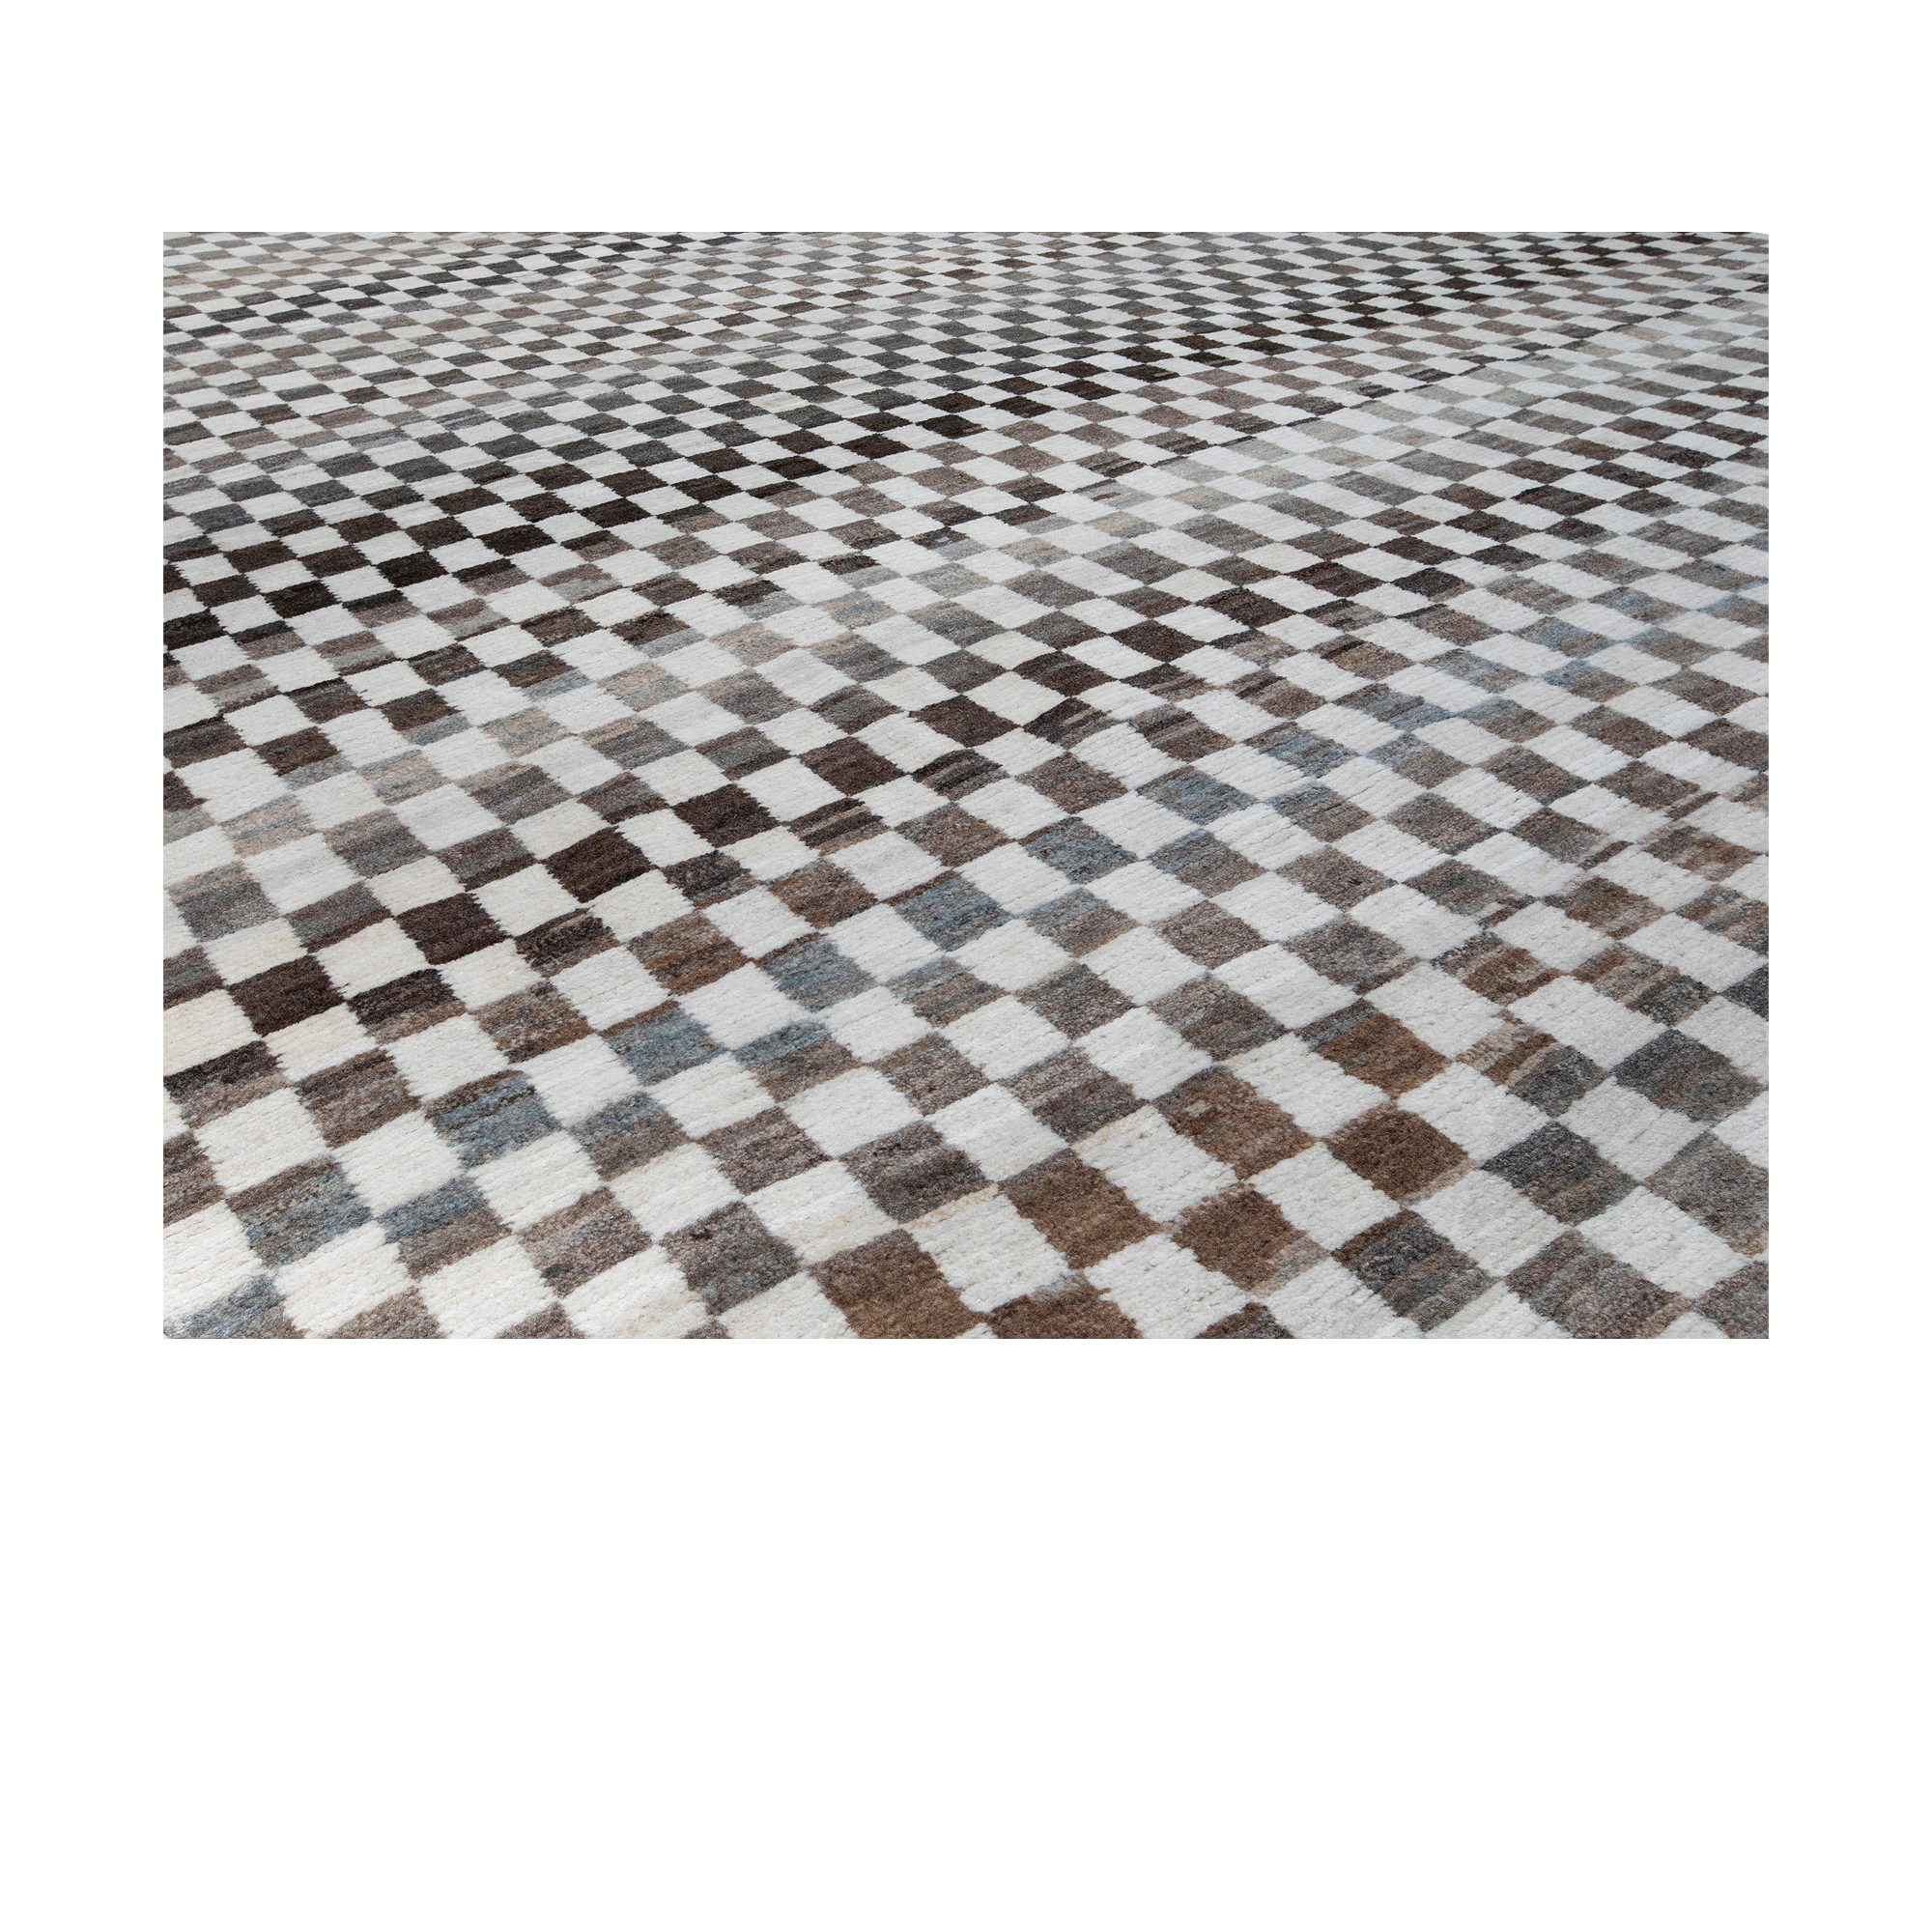 Checkered flatweave rug that is hand-knotted and made from the finest handspun undyed wool. 